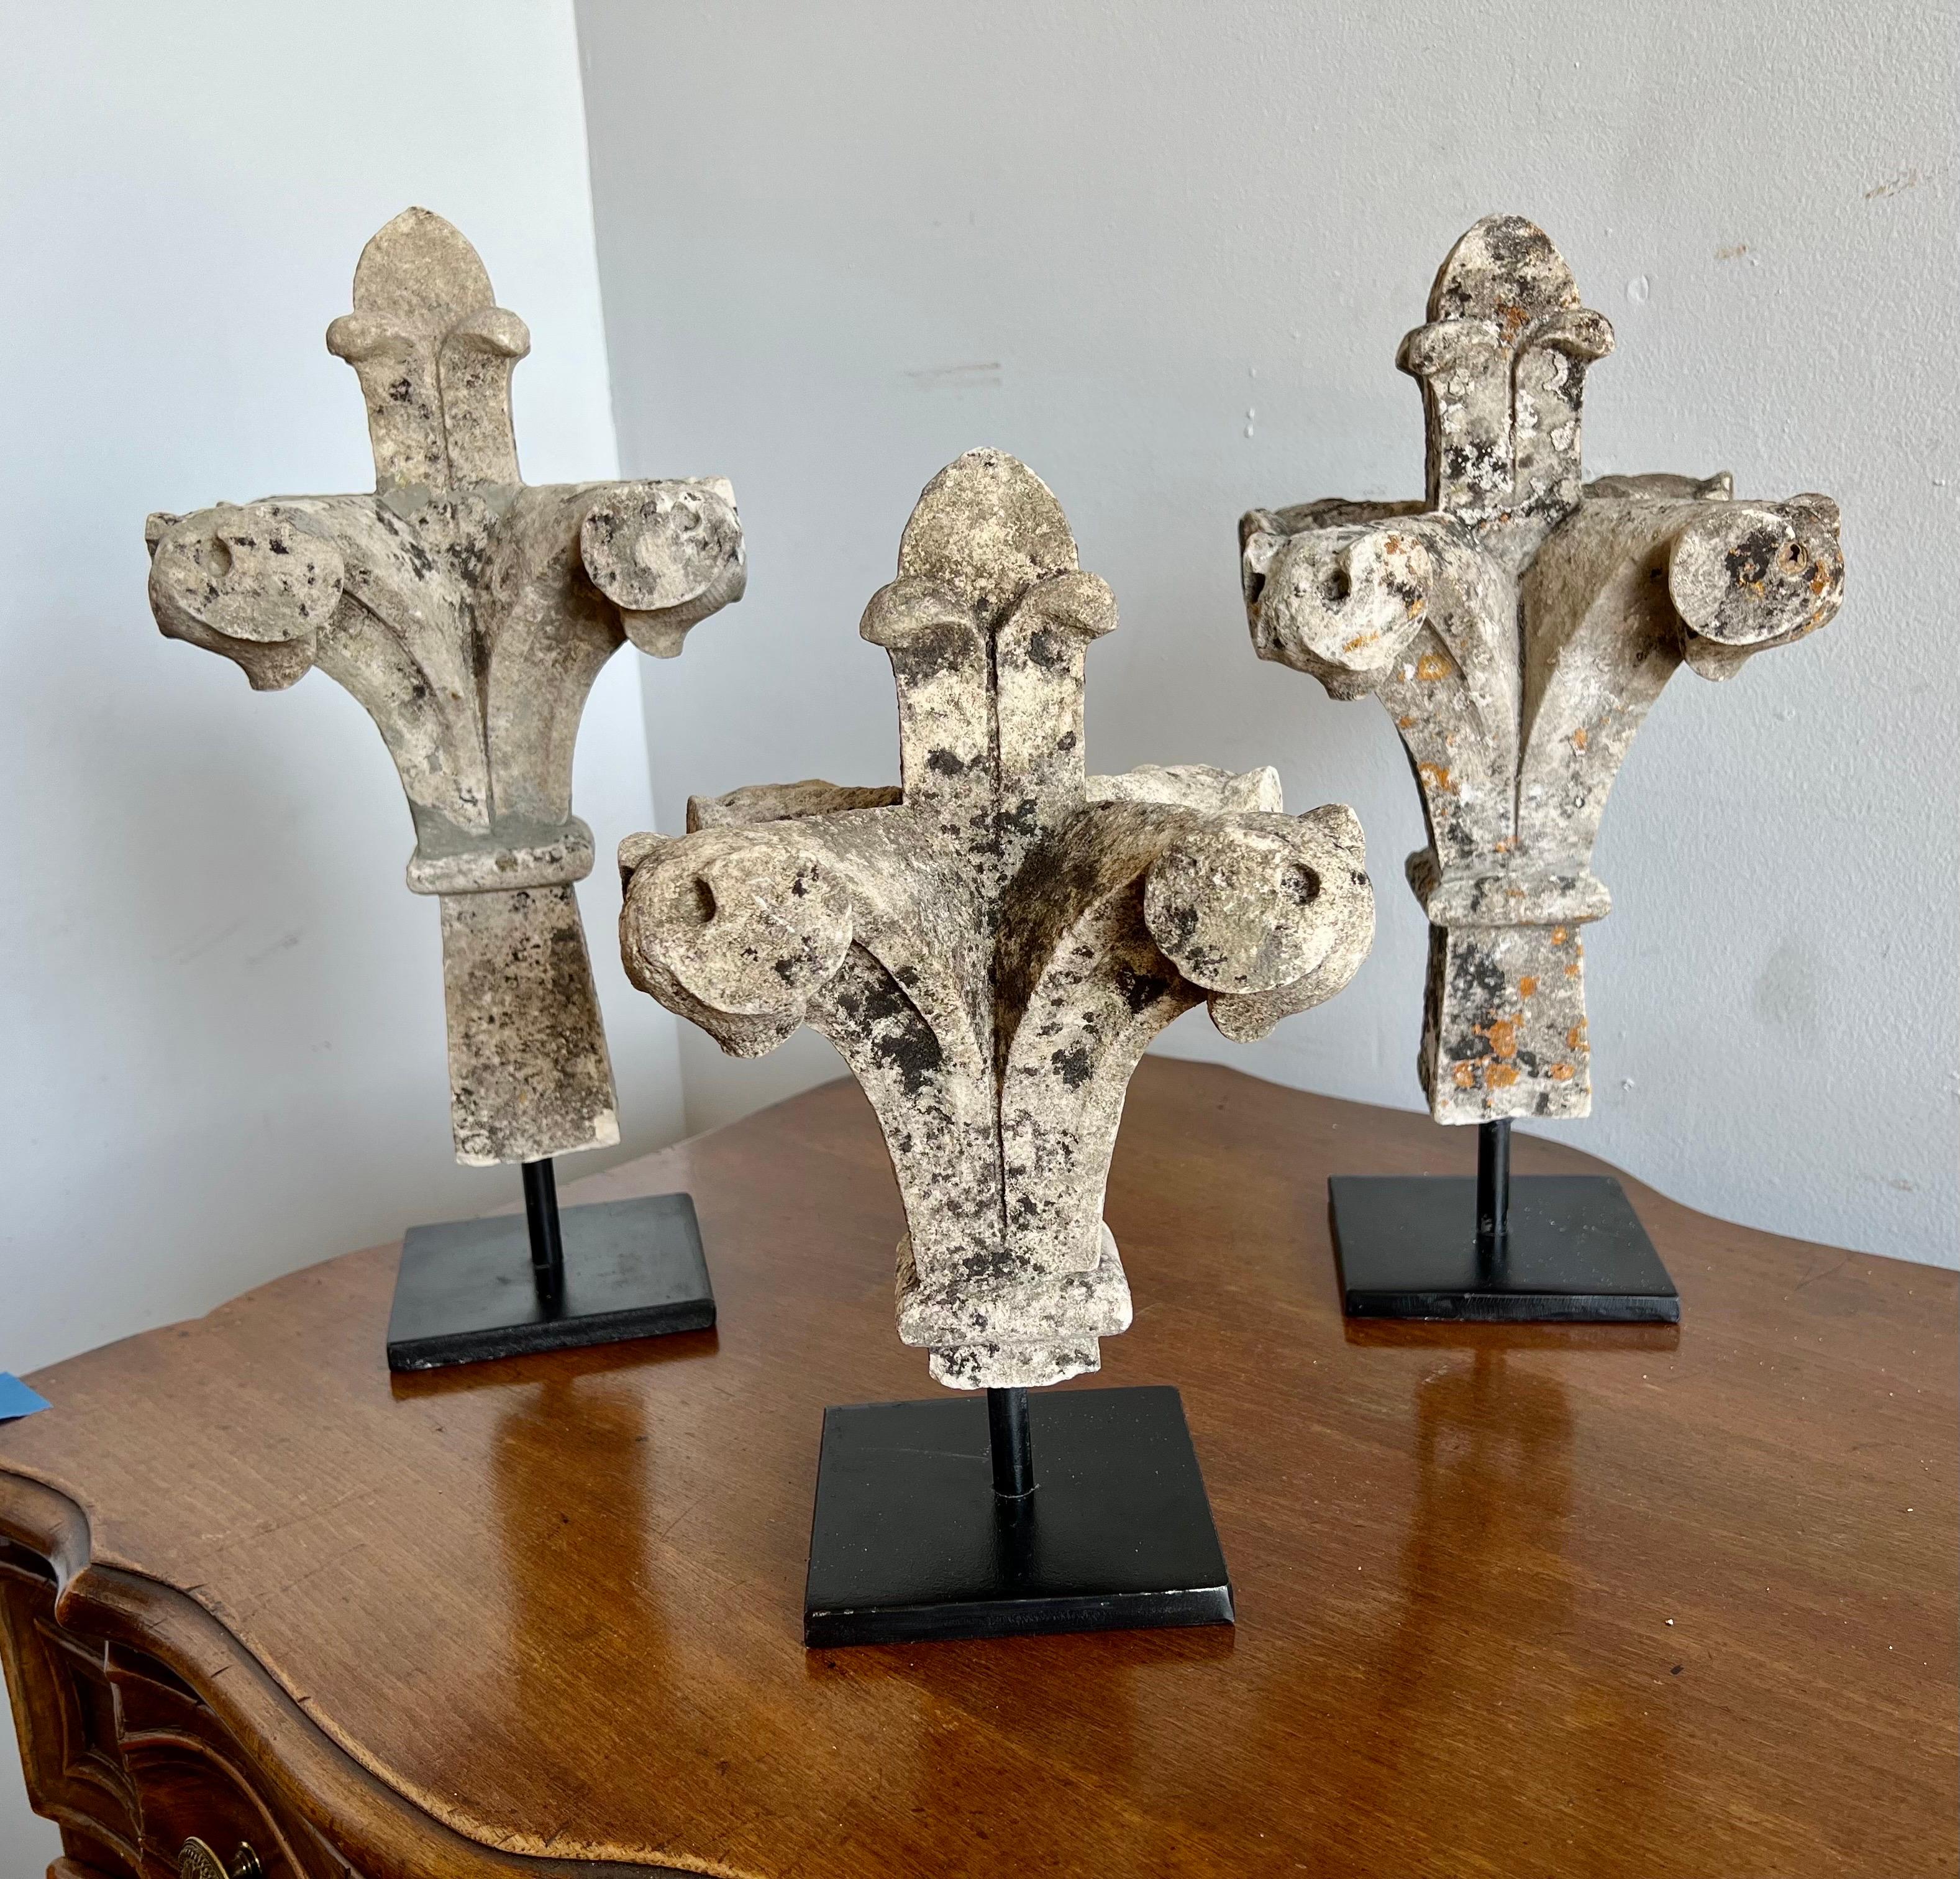 Set of (3) Limestone Finials mounted on Iron bases. The finials are (3) different sizes:
1) 16